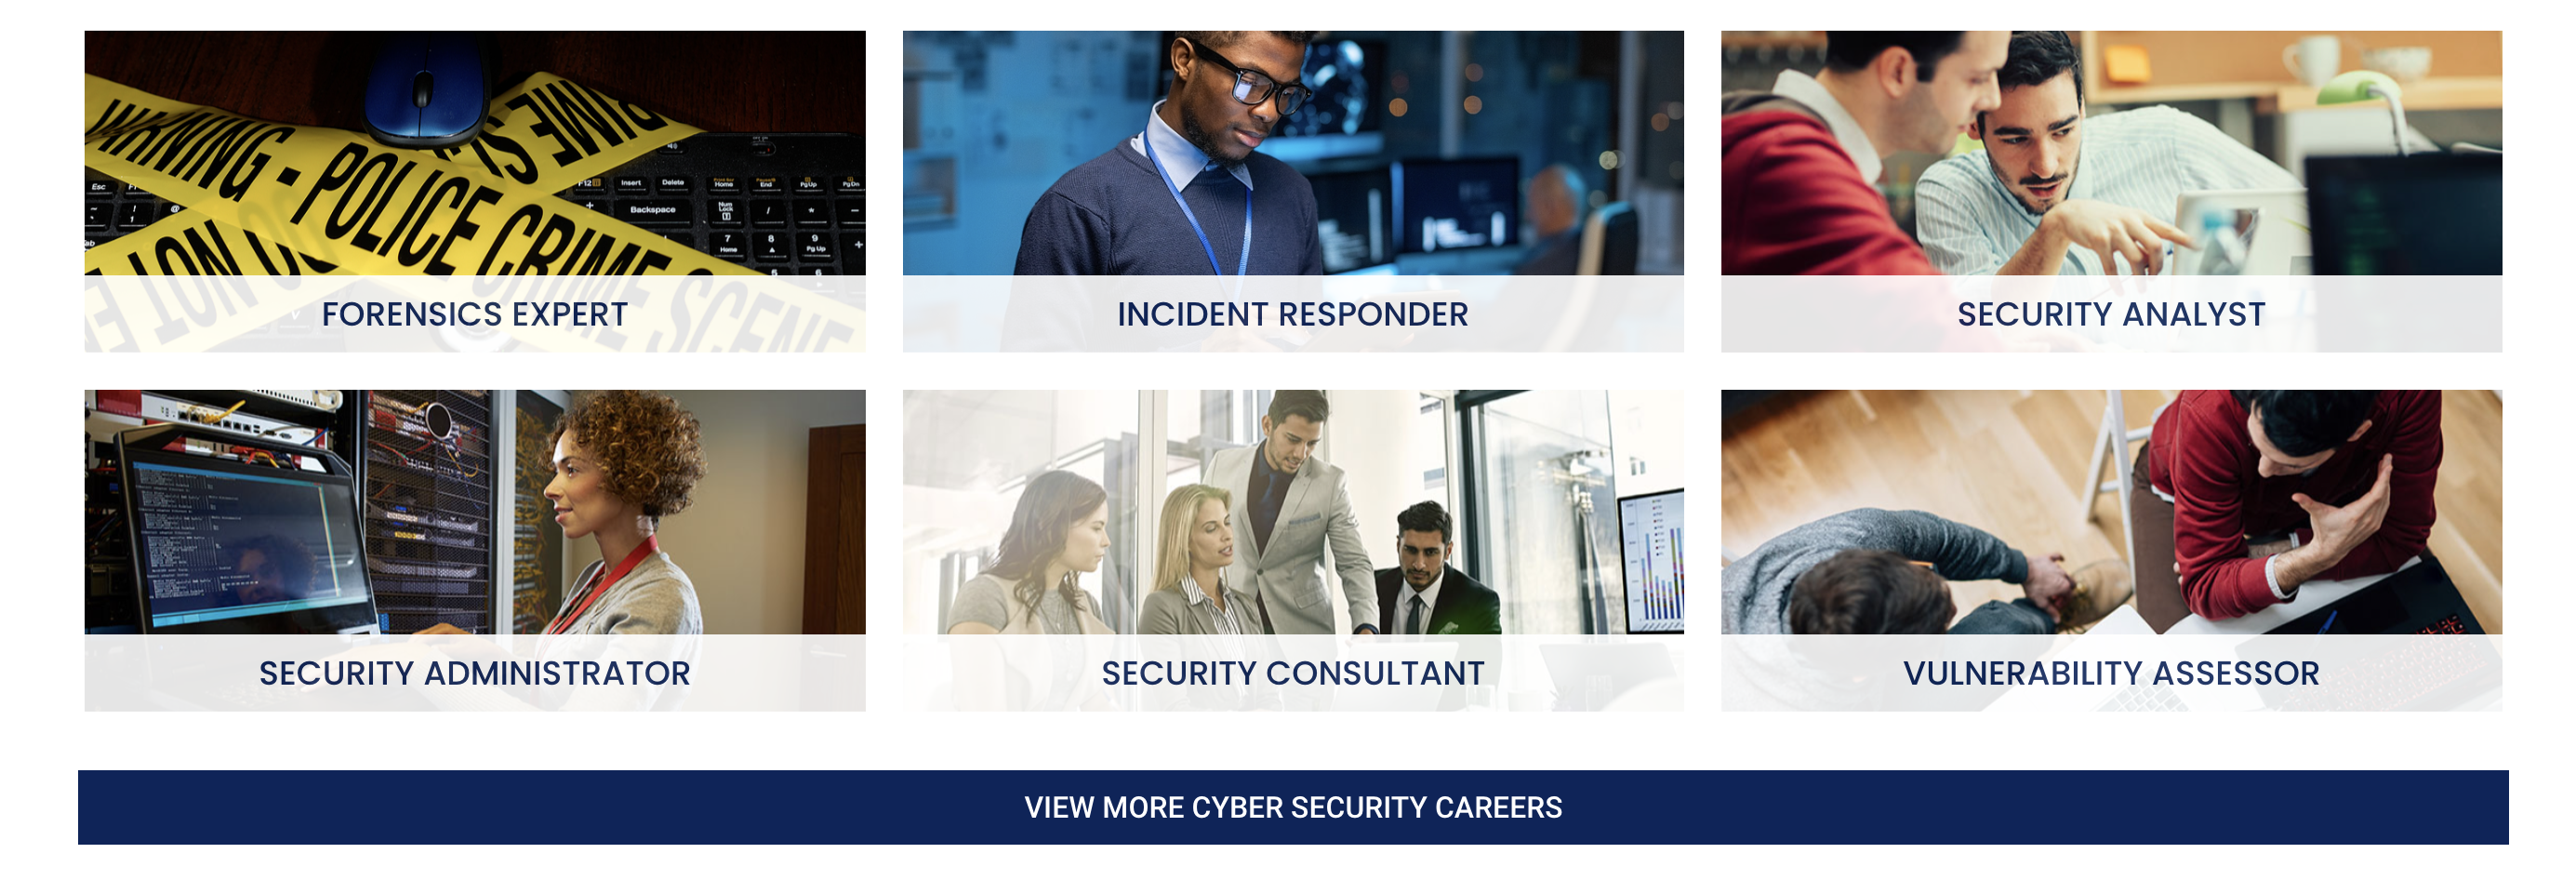 Cybersecurity careers